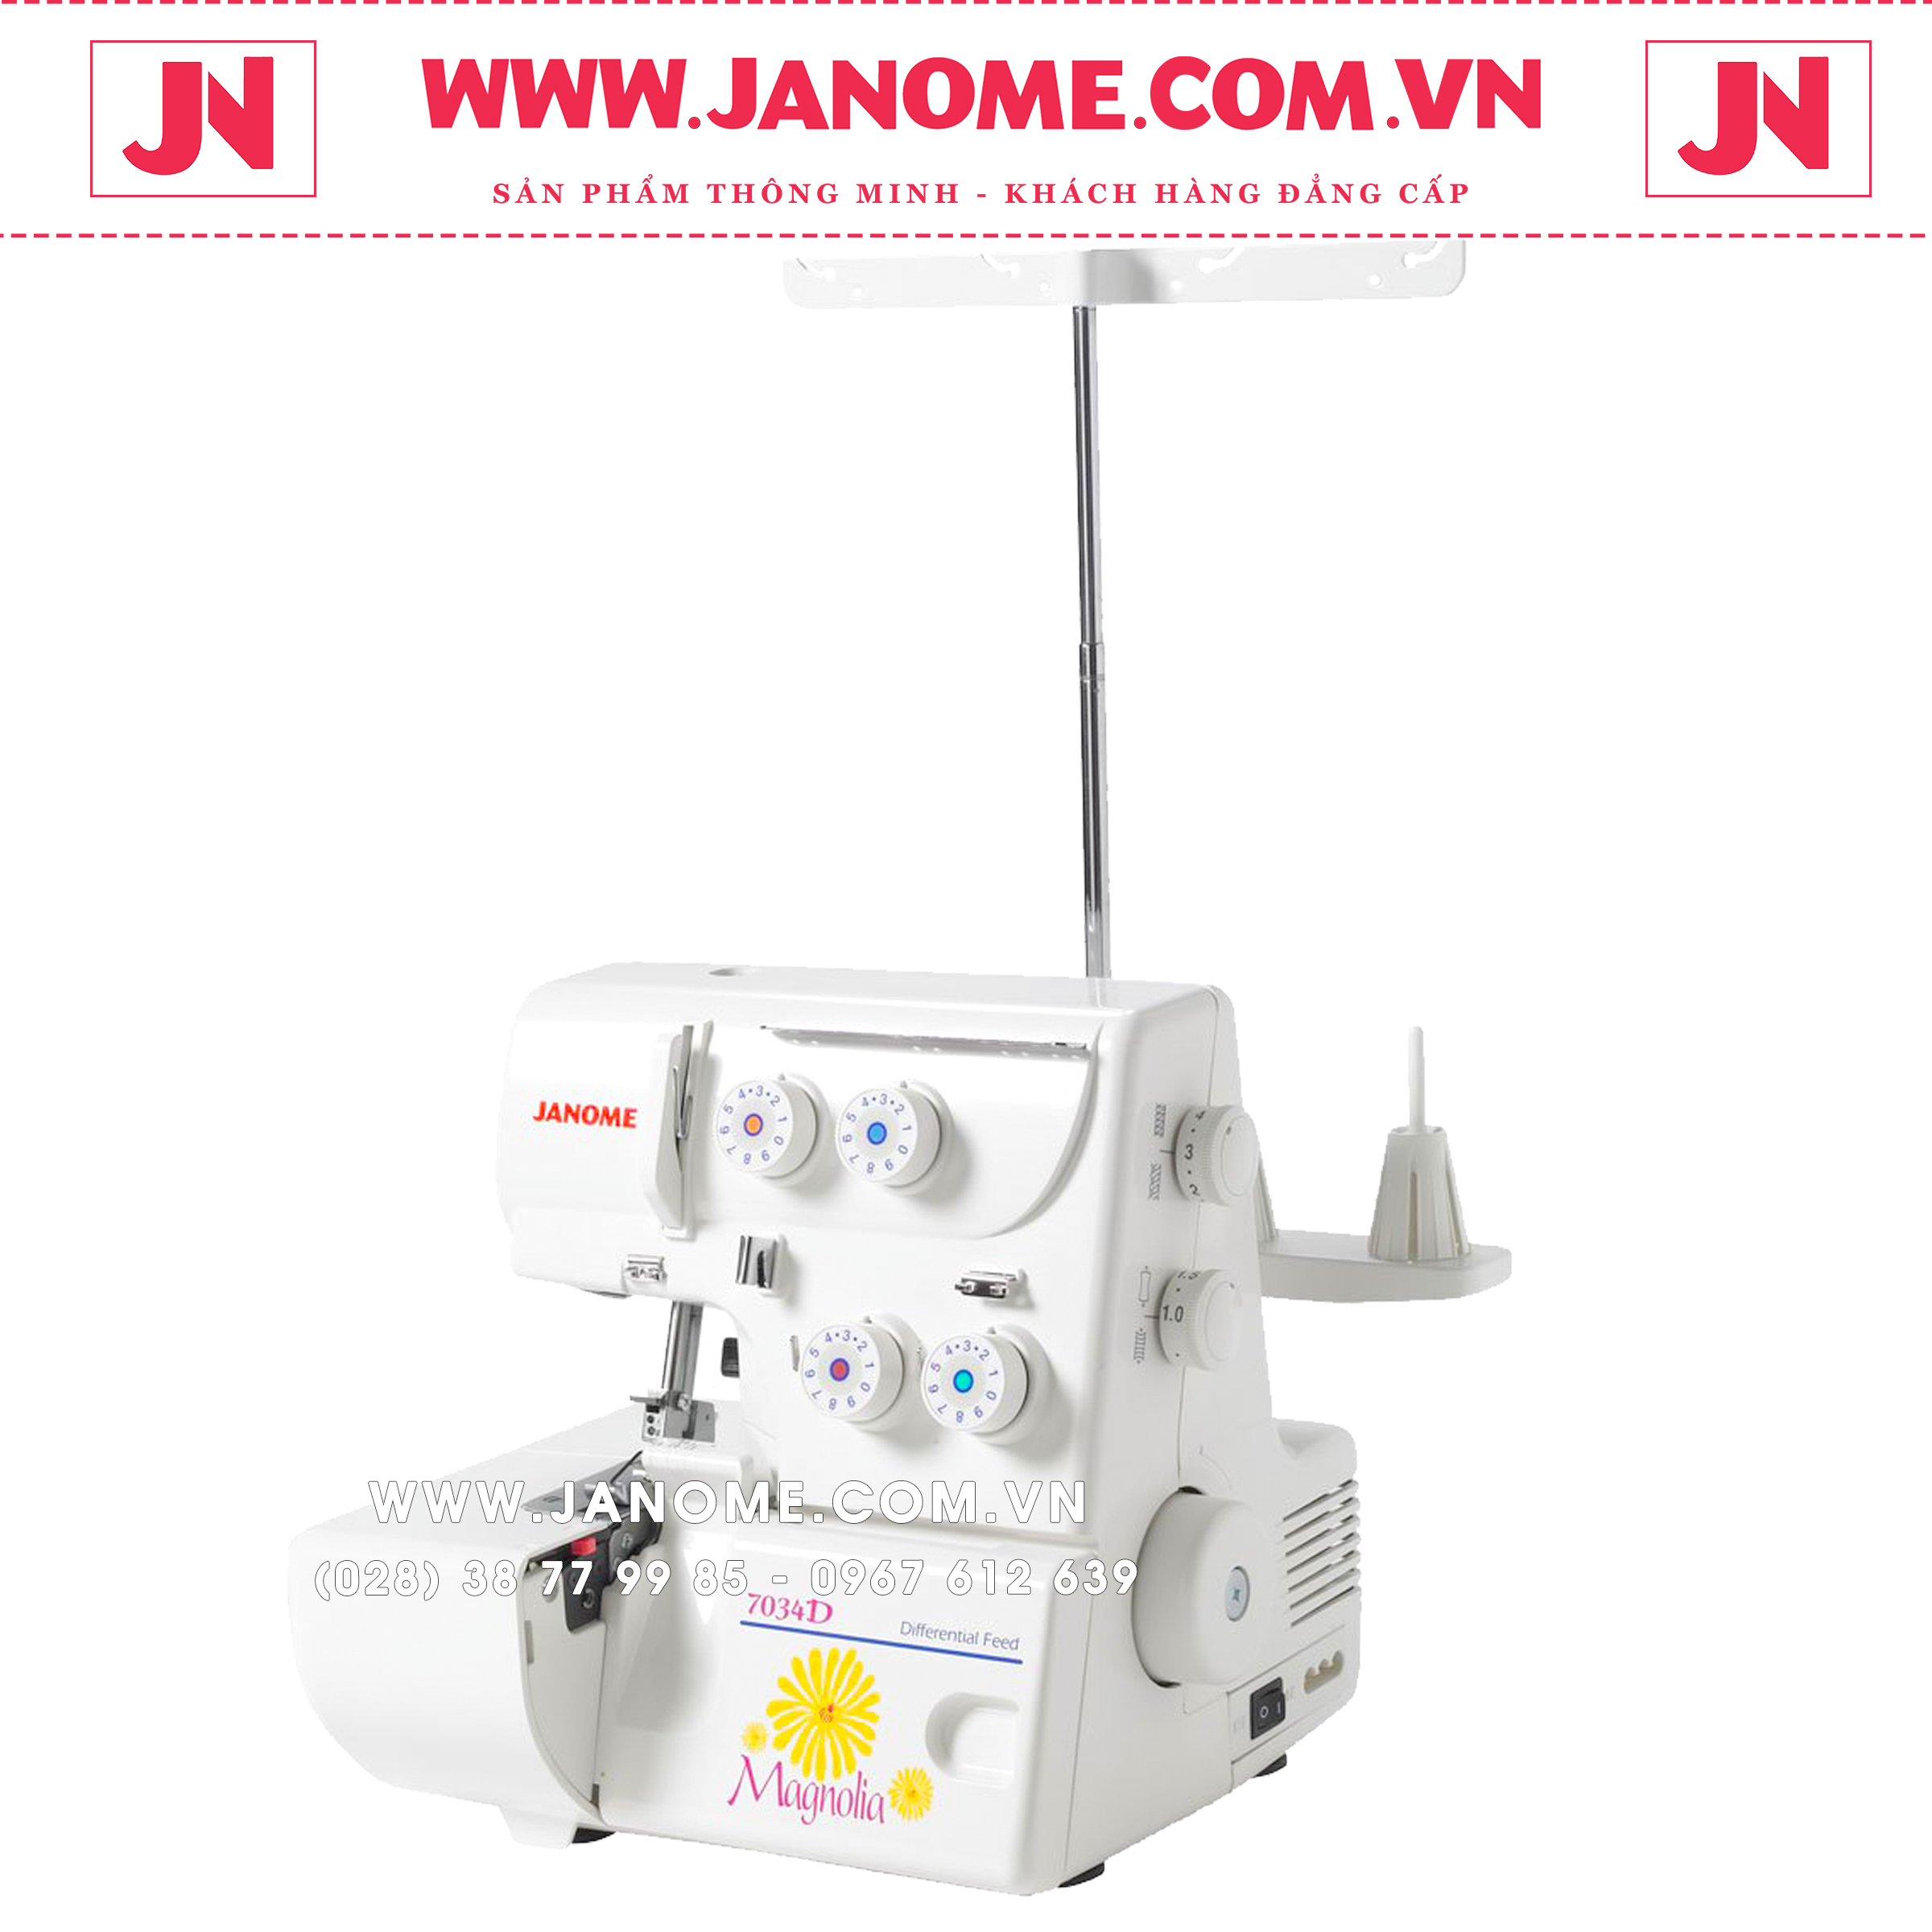 may-vat-so-gia-dinh-janome-7034d